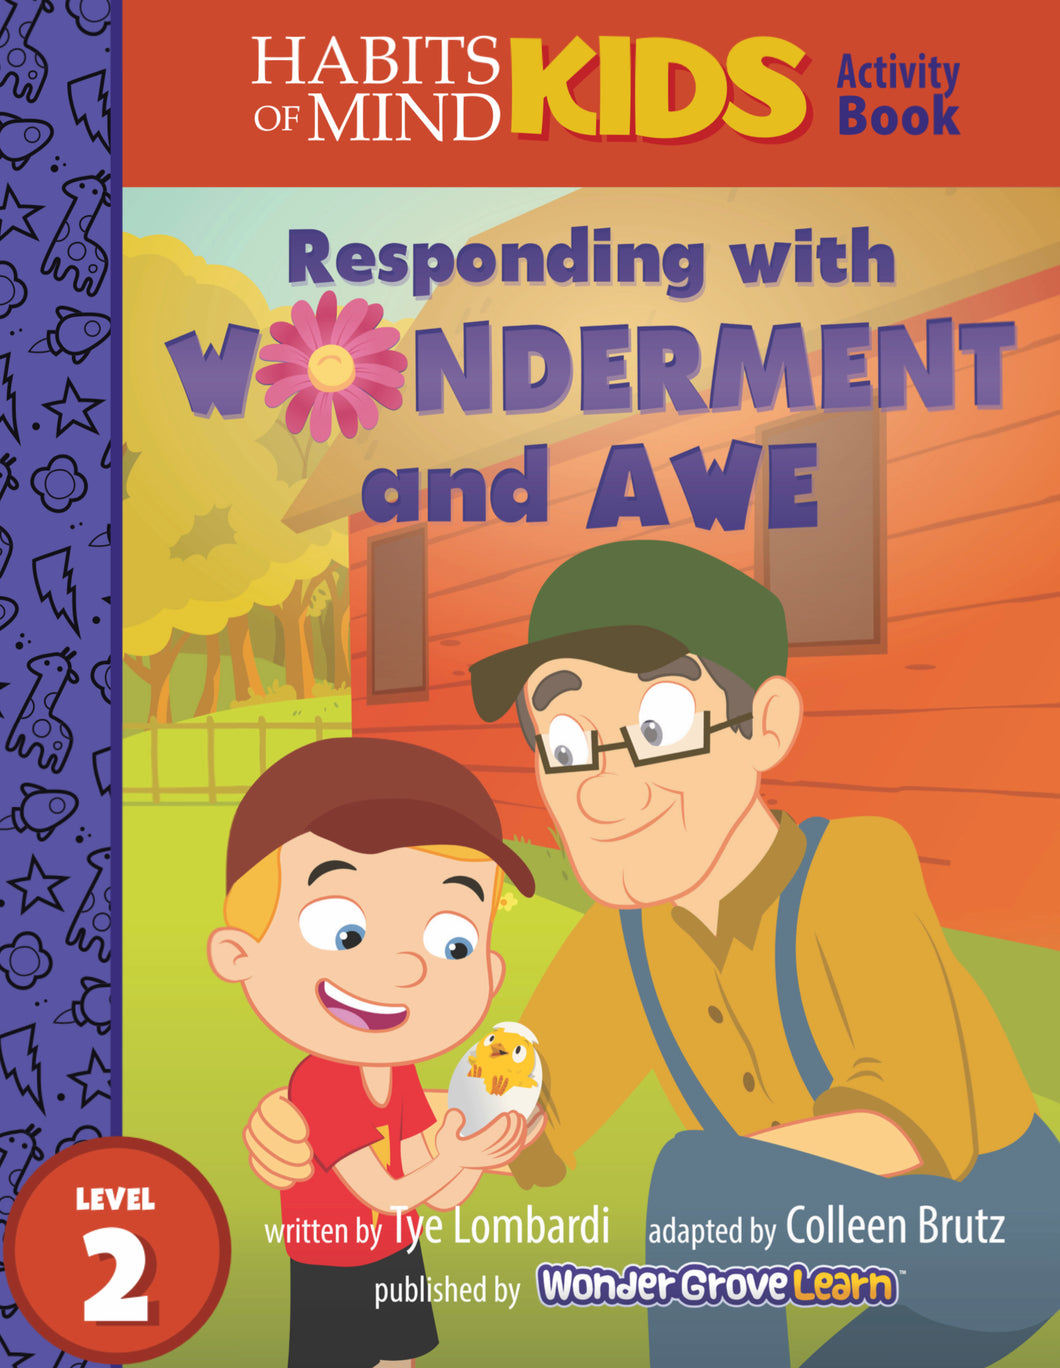 Responding with Wonderment and Awe: A Habits of Mind Story for Second Grade